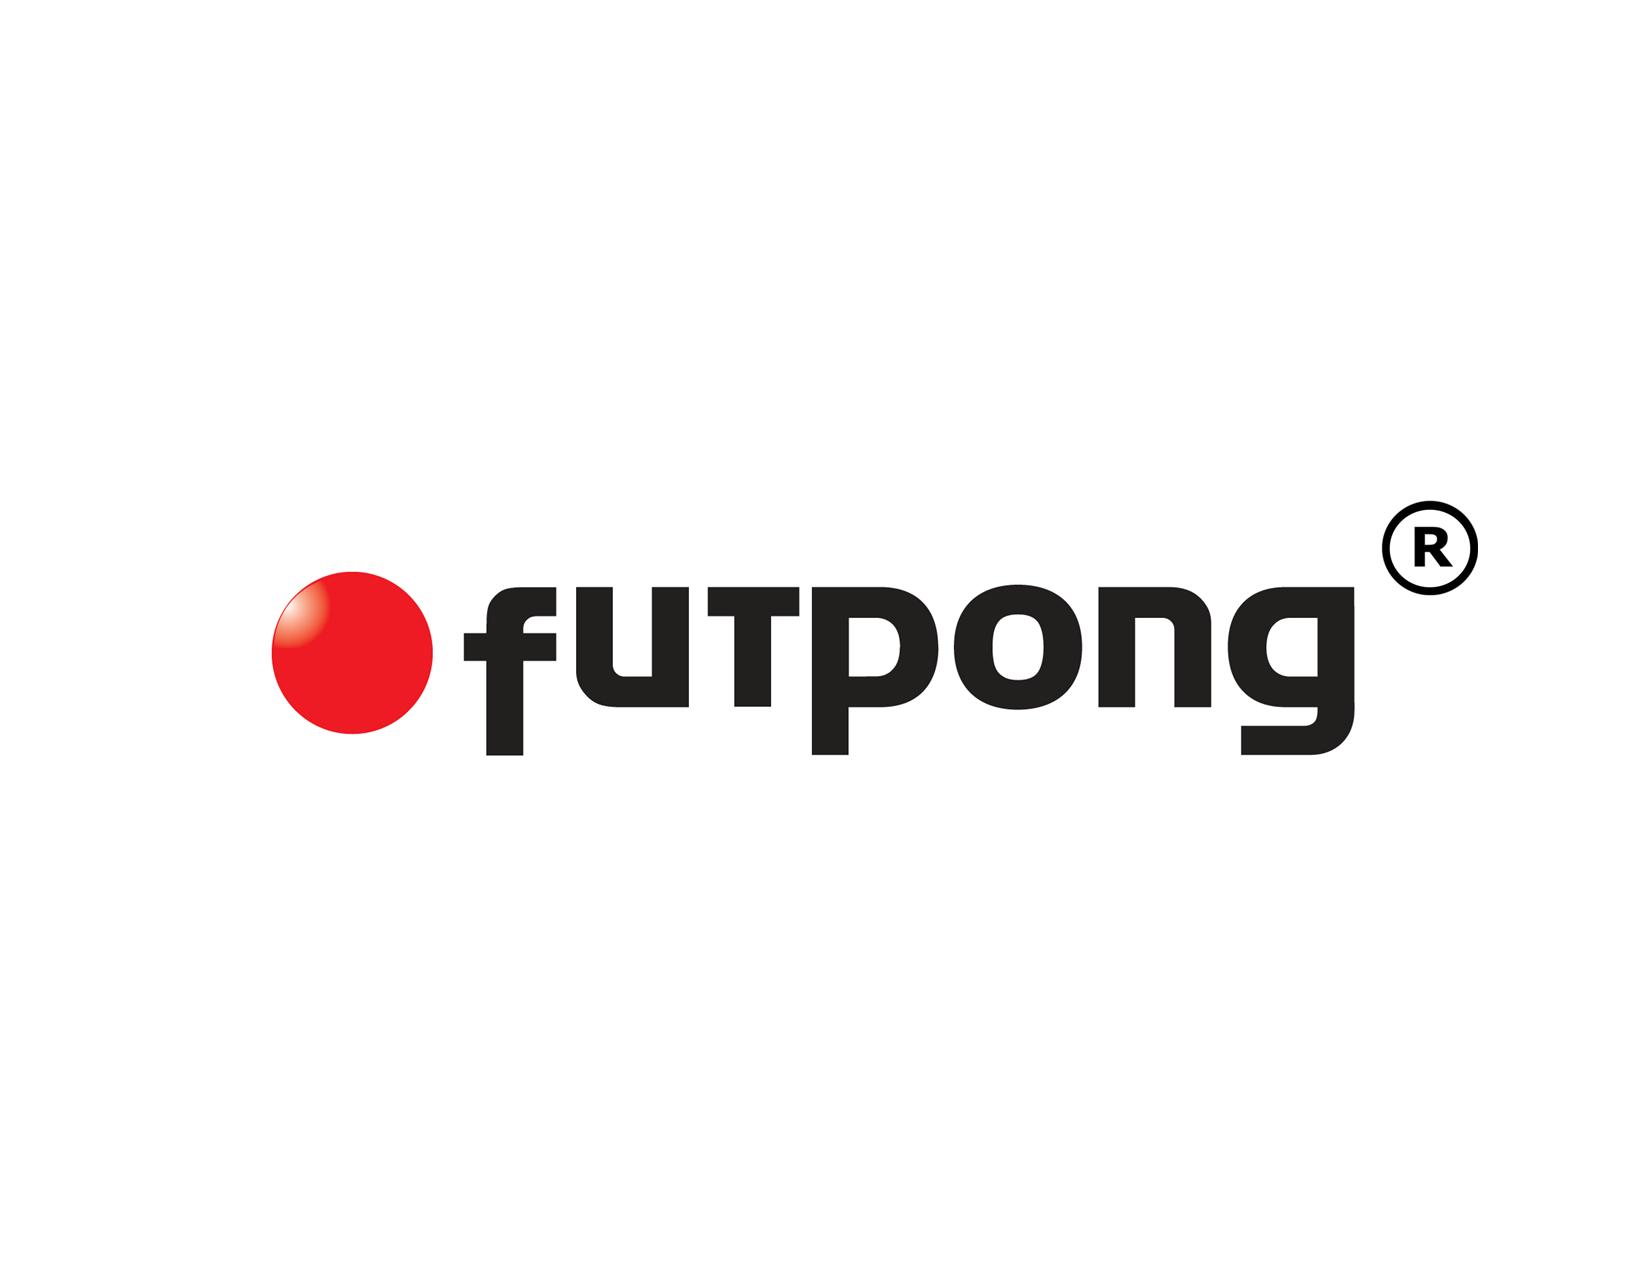 Copy of Futpong_ball_with_circledR.jpg